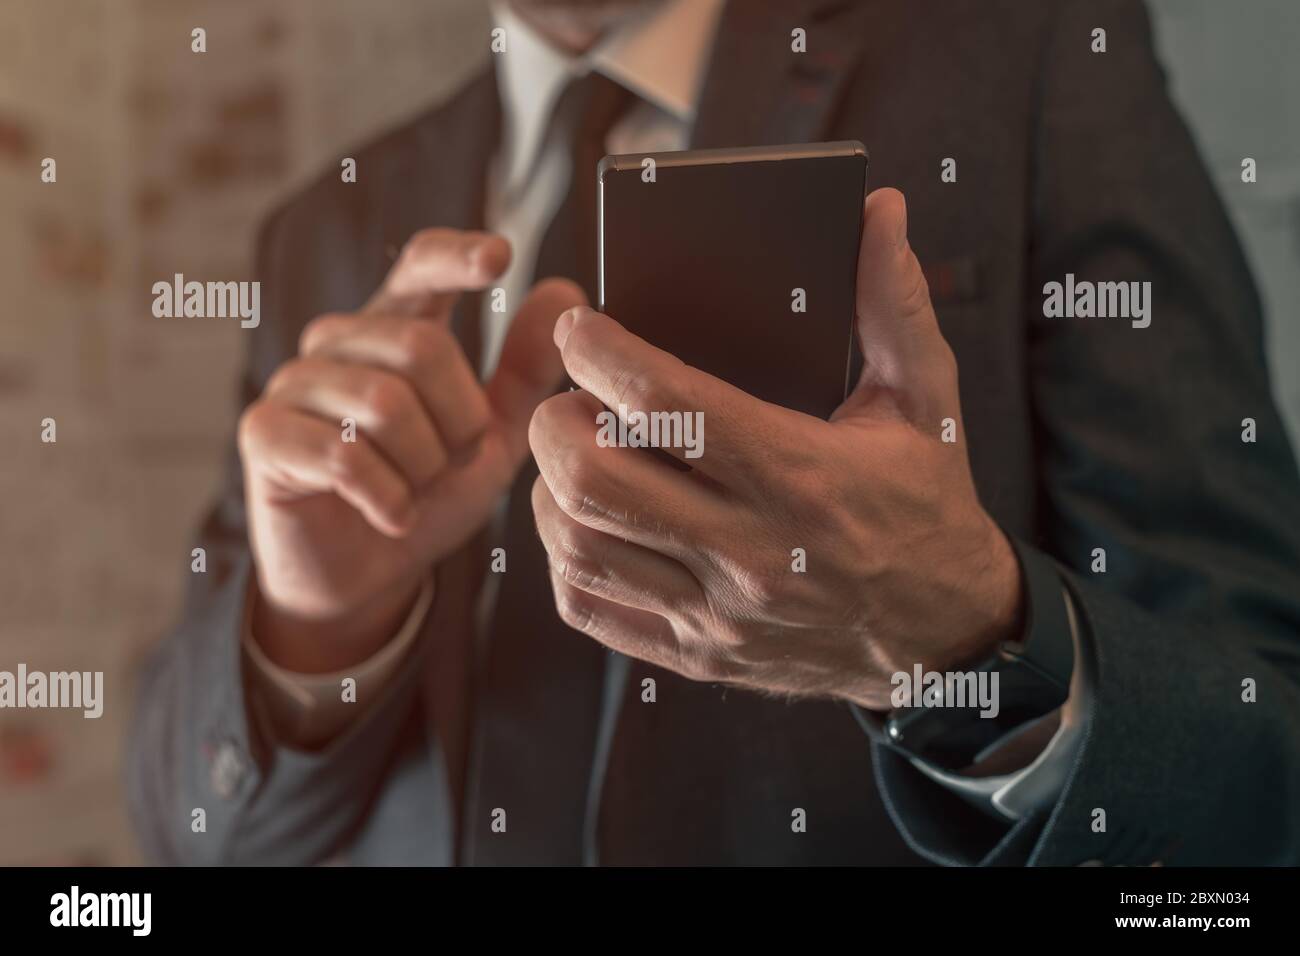 Businessman using mobile phone in fake news infodemic concept with tabloid newspaper pages in background Stock Photo